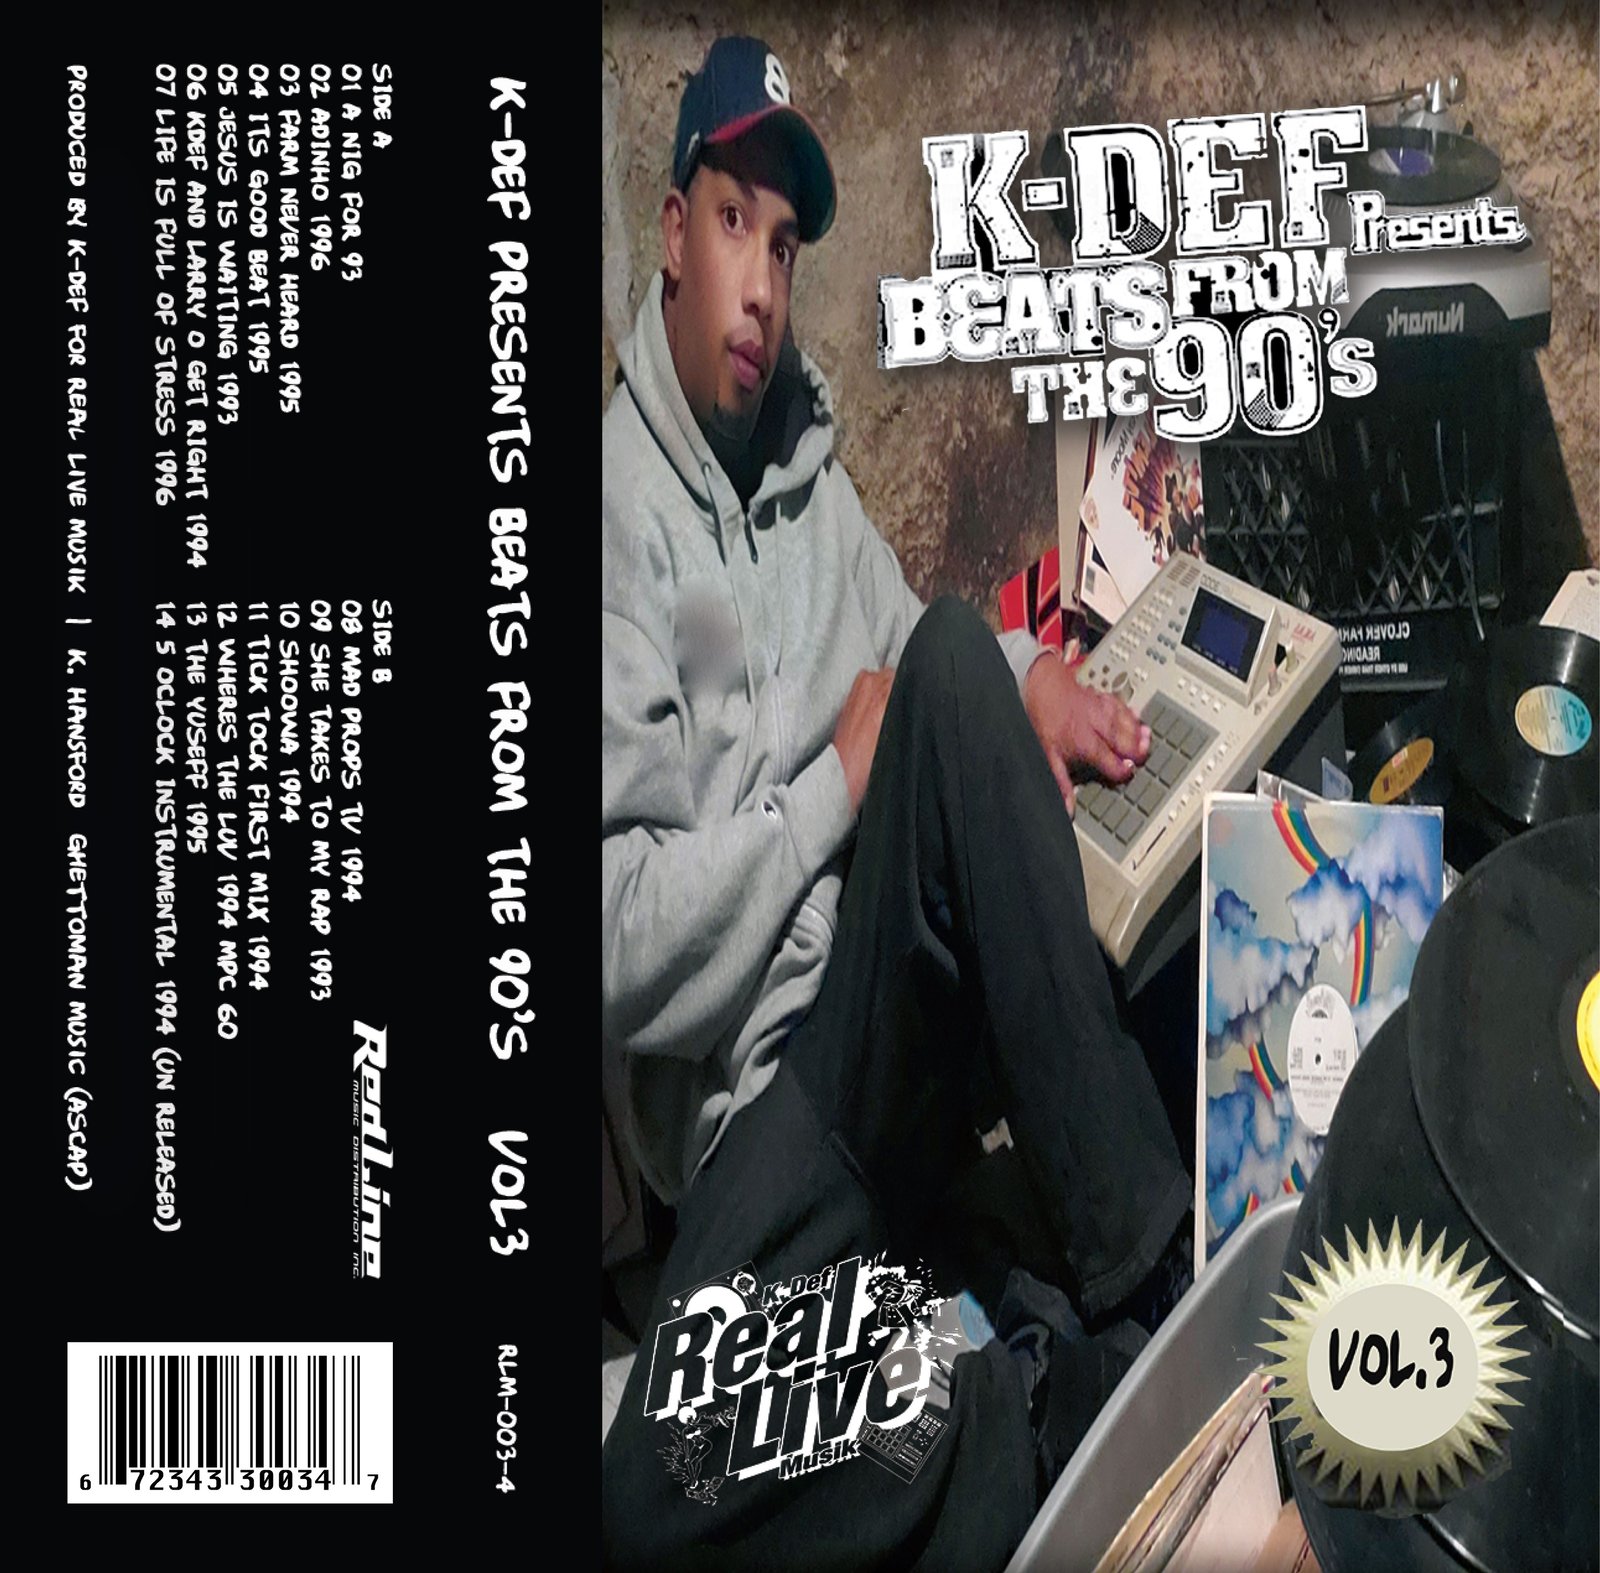 K-DEF Presents BEATS FROM THE 90'S VOL. 3 CASSETTE